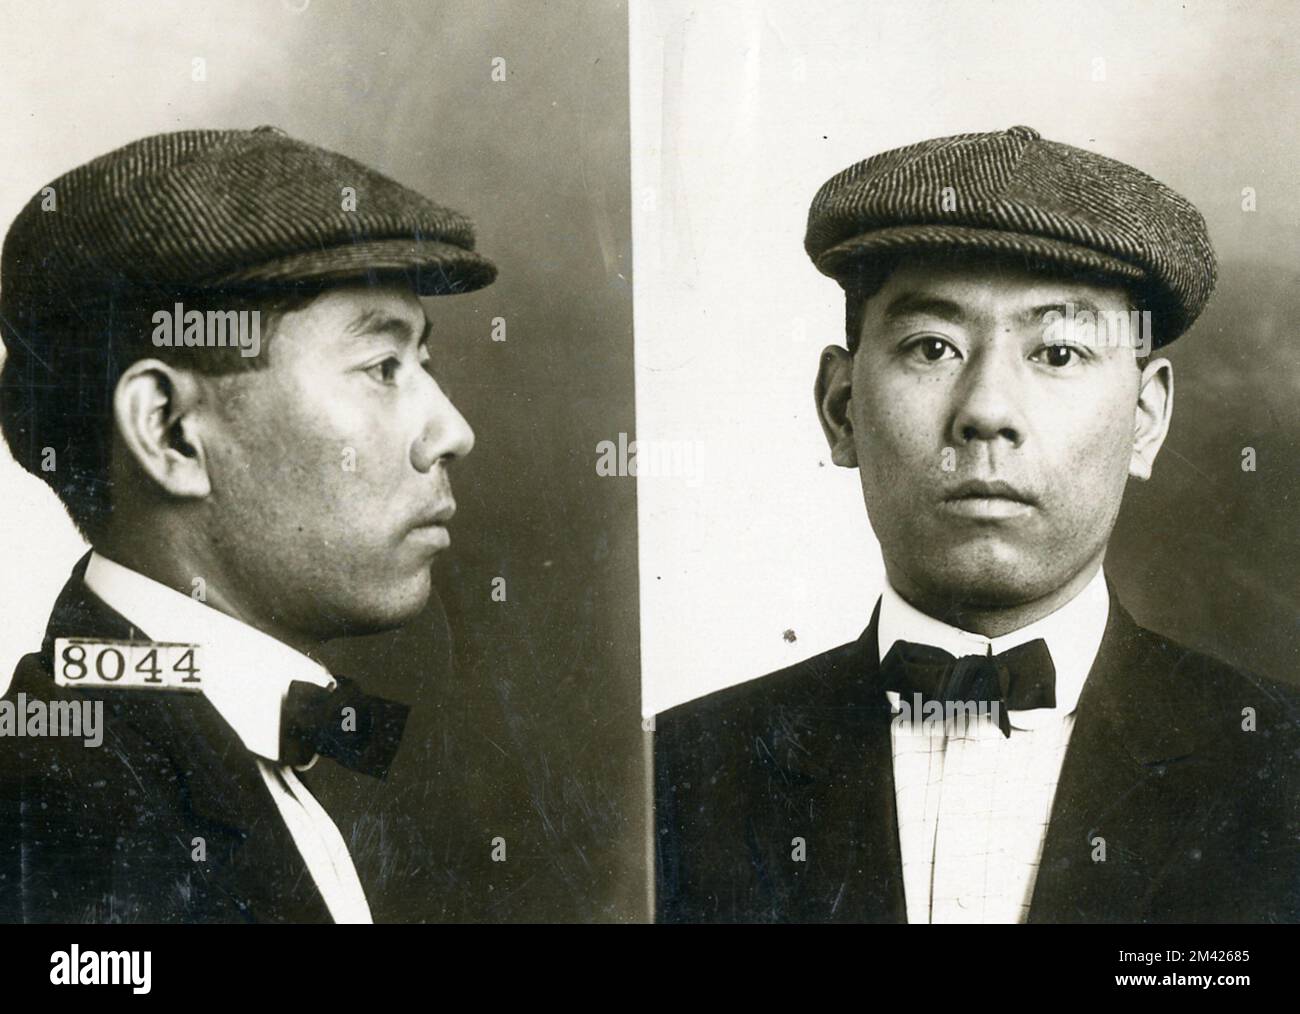 Photograph of Tom Akiyama. This item is the prison photograph, also known as the 'mug shot,' of Leavenworth inmate Tom Akiyama register number 8044. Bureau of Prisons, Inmate case files. Stock Photo